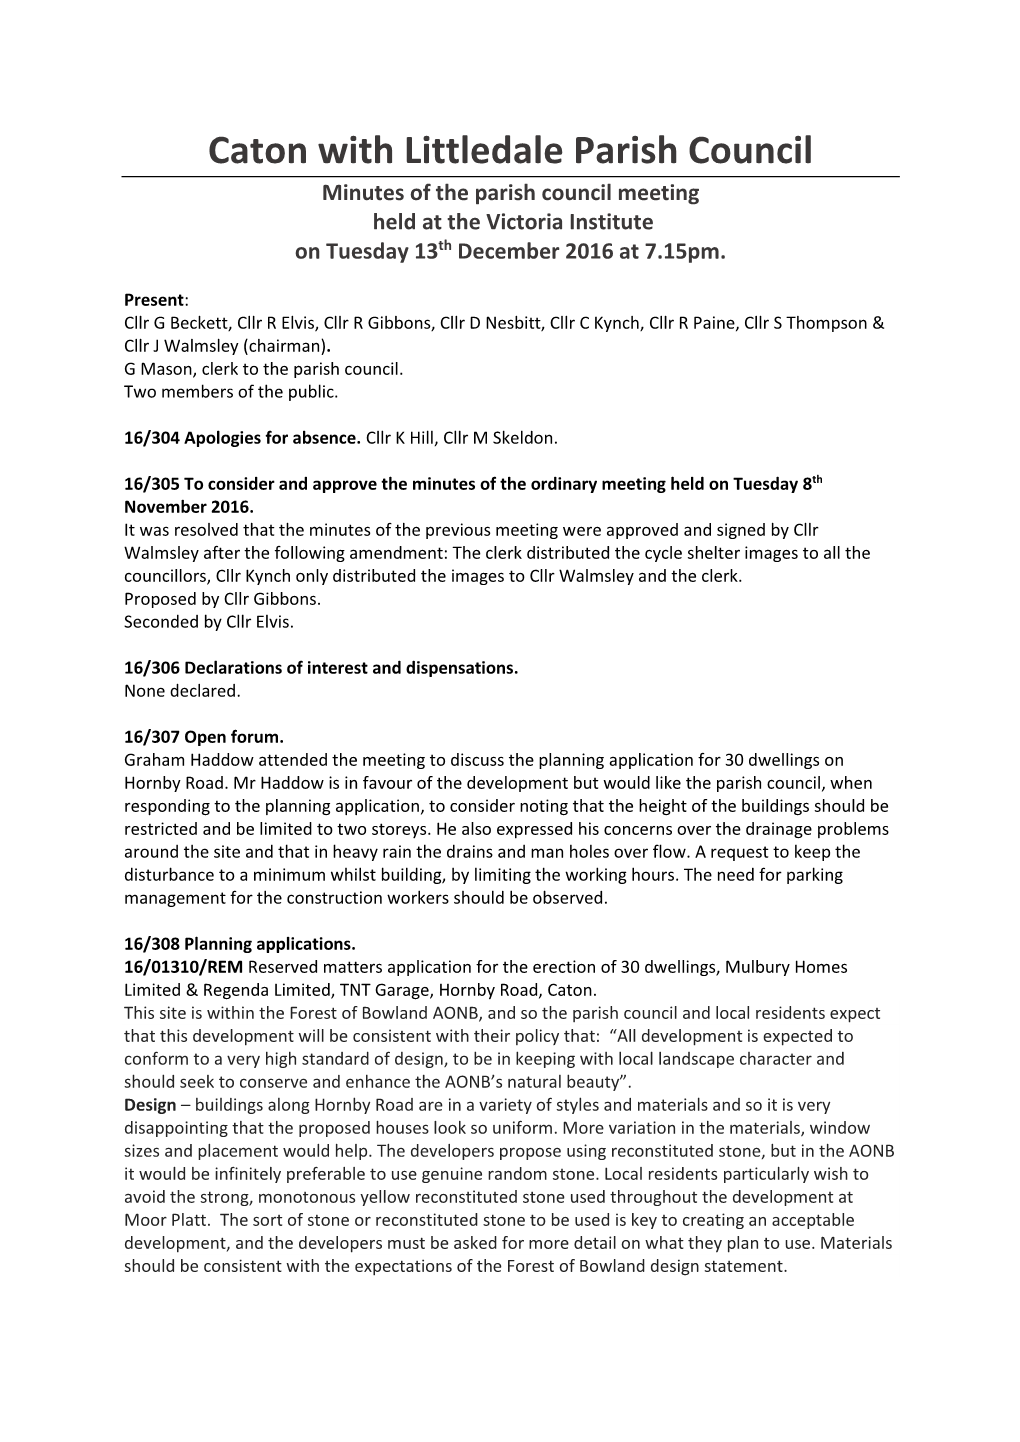 Caton with Littledale Parish Council Minutes of the Parish Council Meeting Held at the Victoria Institute on Tuesday 13Th December 2016 at 7.15Pm